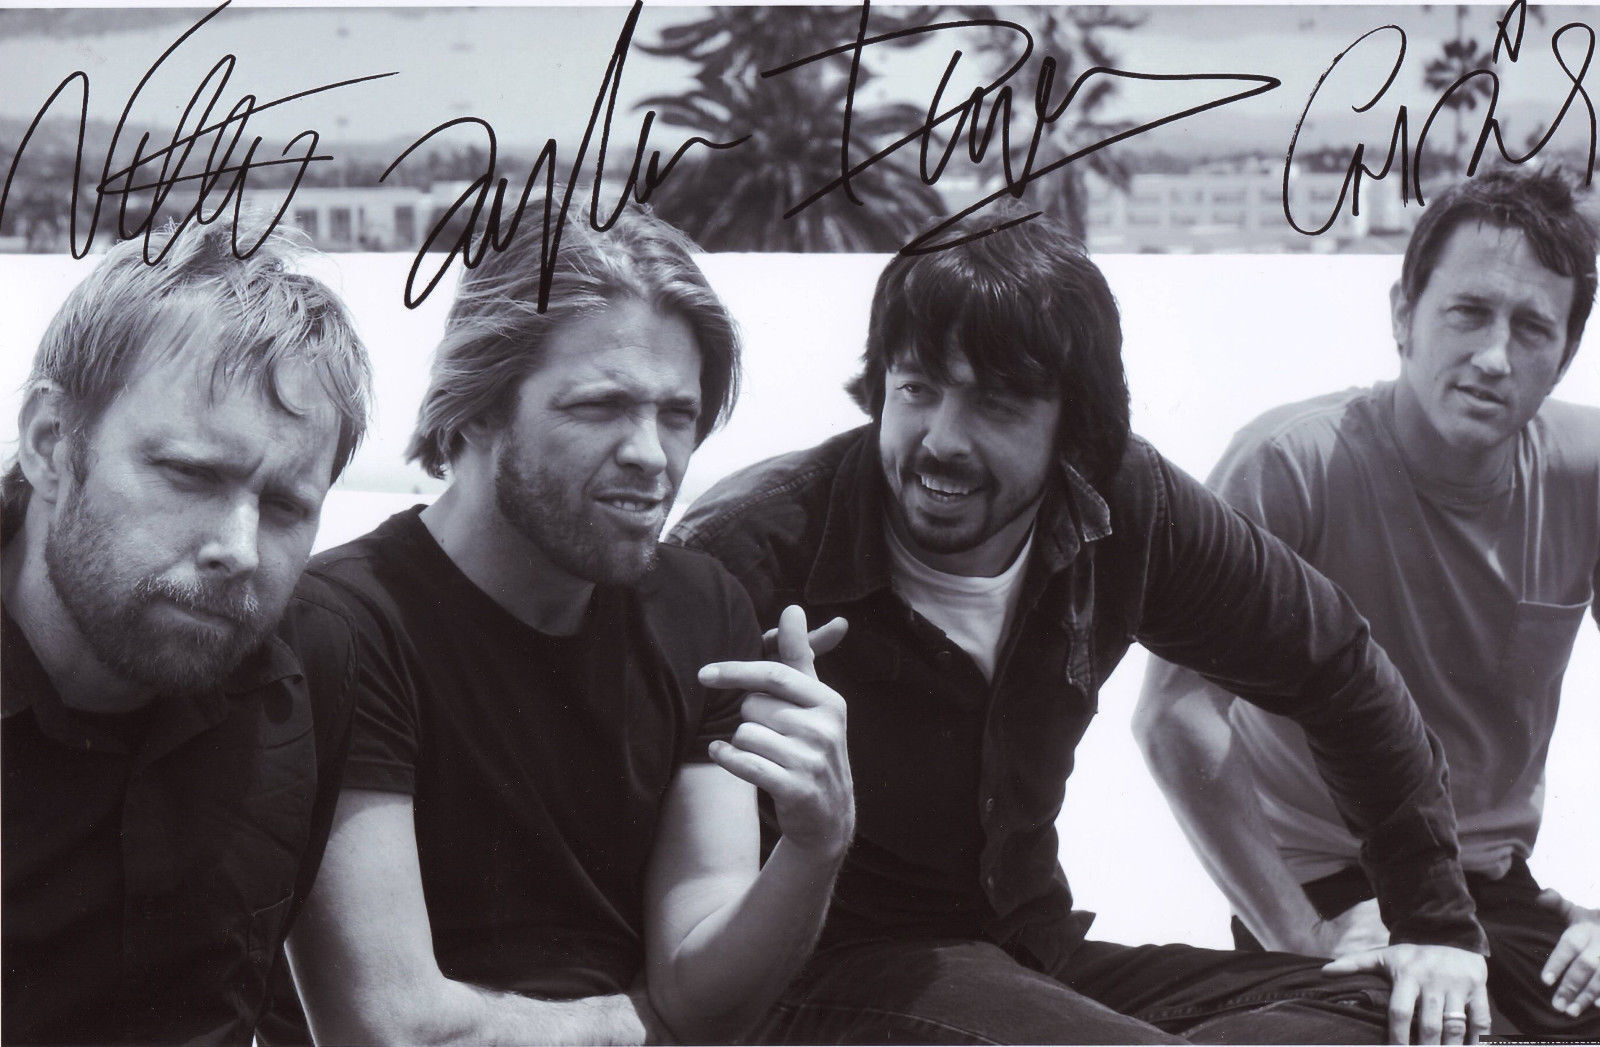 FOO FIGHTERS ENTIRE GROUP AUTOGRAPH SIGNED PP Photo Poster painting POSTER